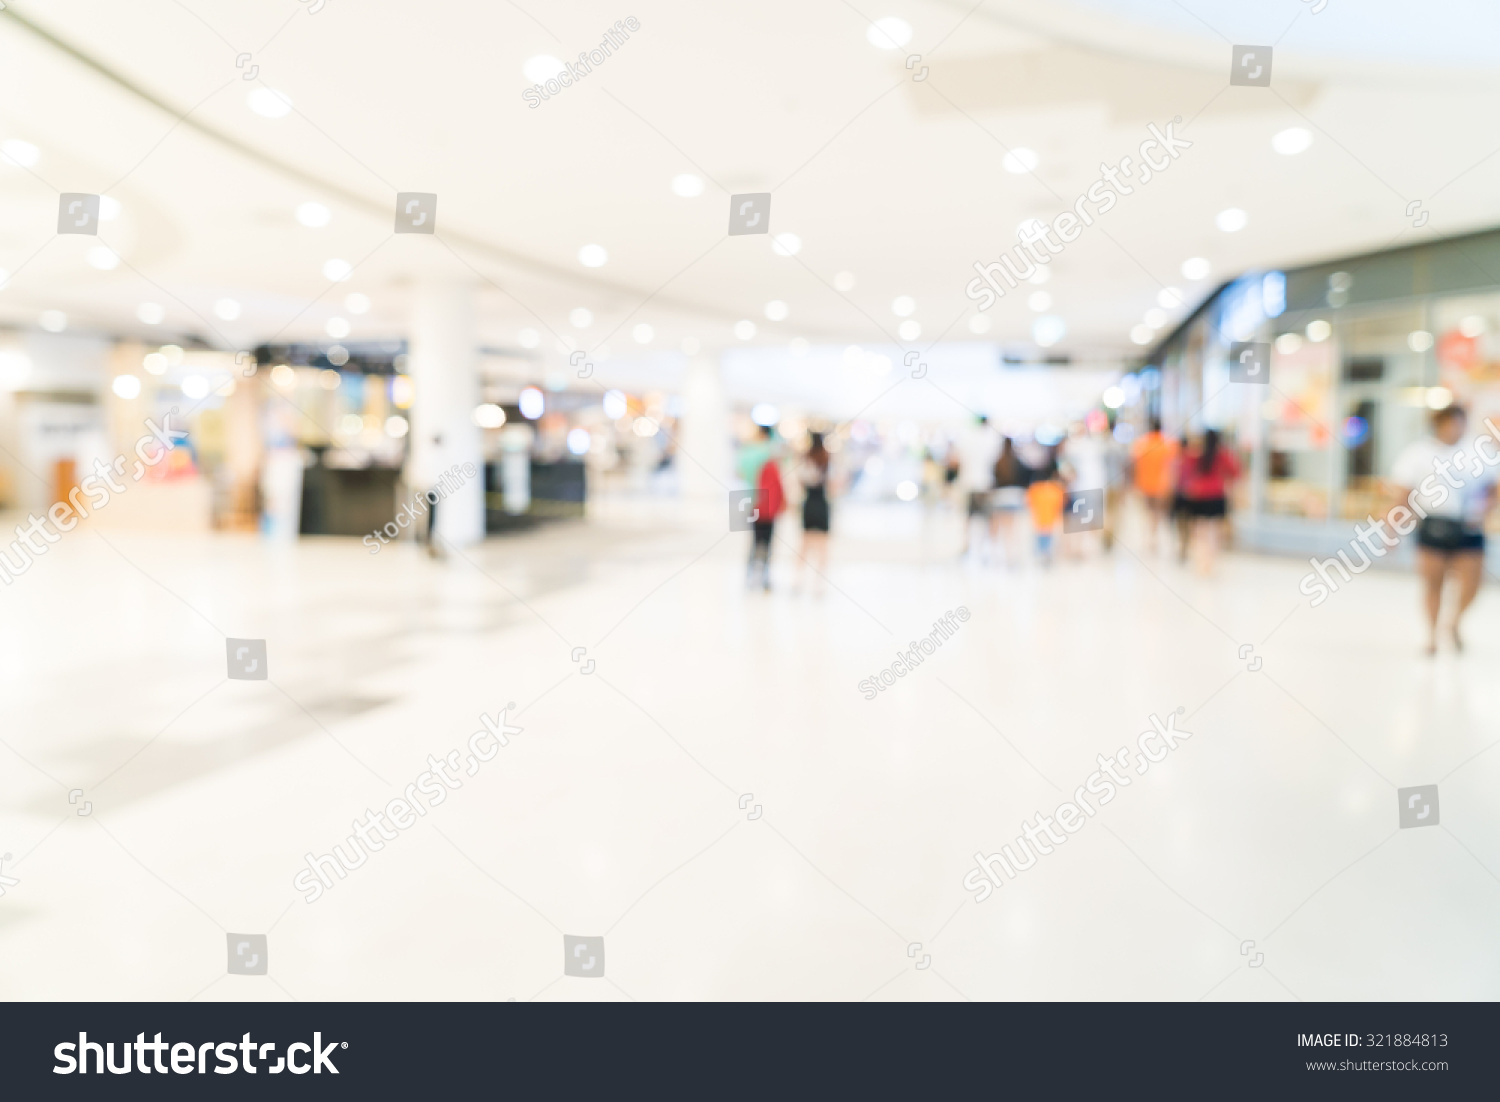 Abstract blur shopping mall background #321884813